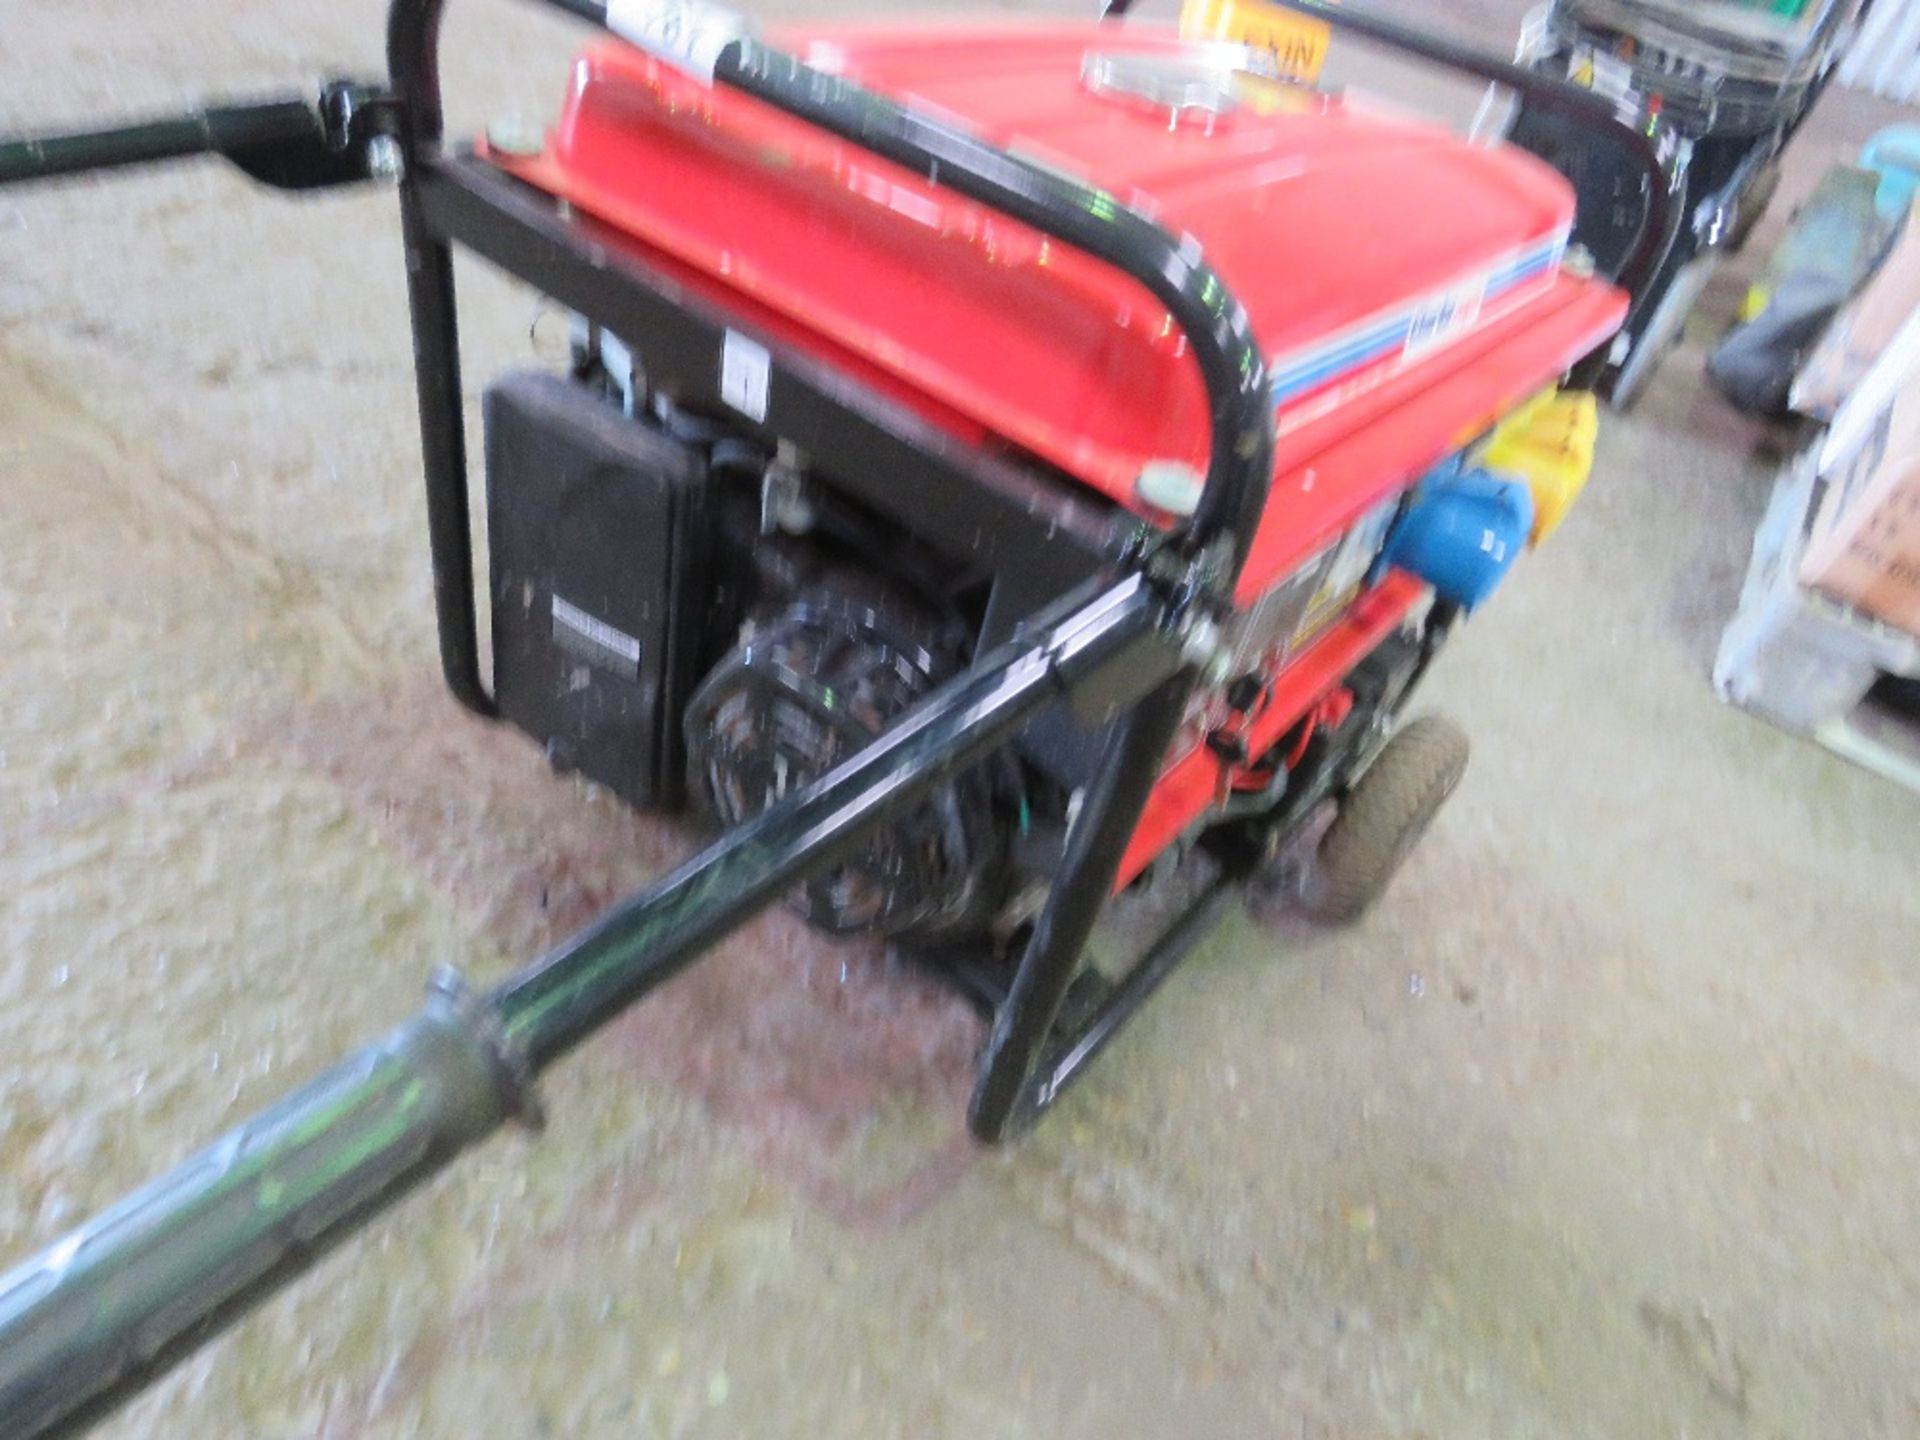 CLARKE 13HP POWERED GENERATOR, ELECTRIC START. NO VAT ON HAMMER PRICE. WHEN TESTED WAS SEEN TO RUN - Image 4 of 4